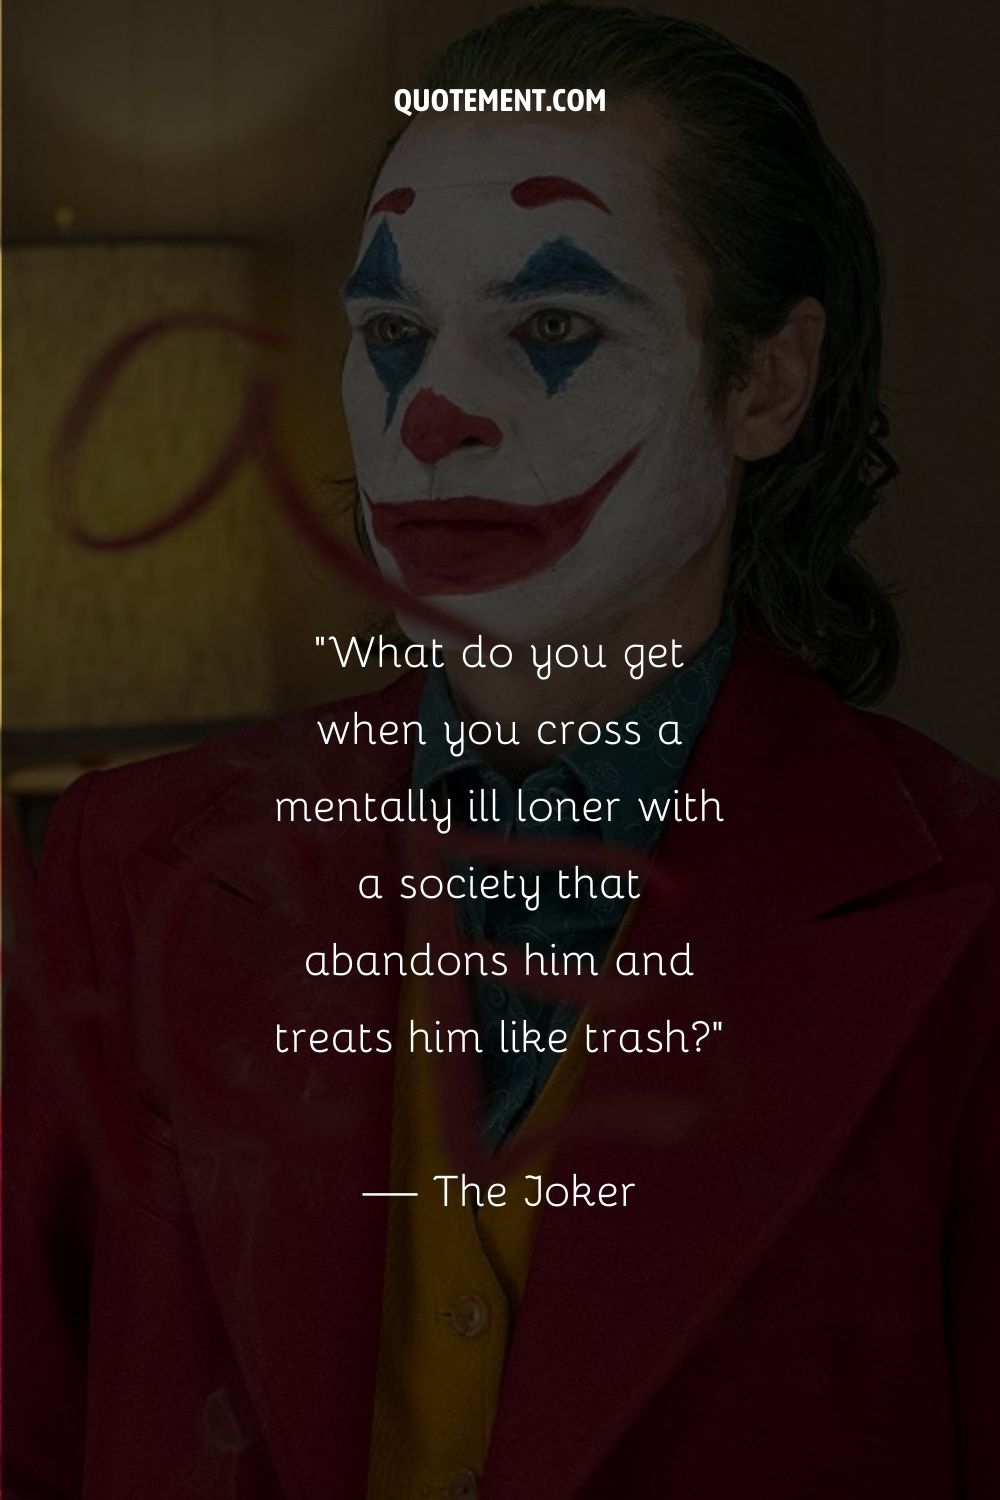 Famous Joker quote from the movie Joker.
